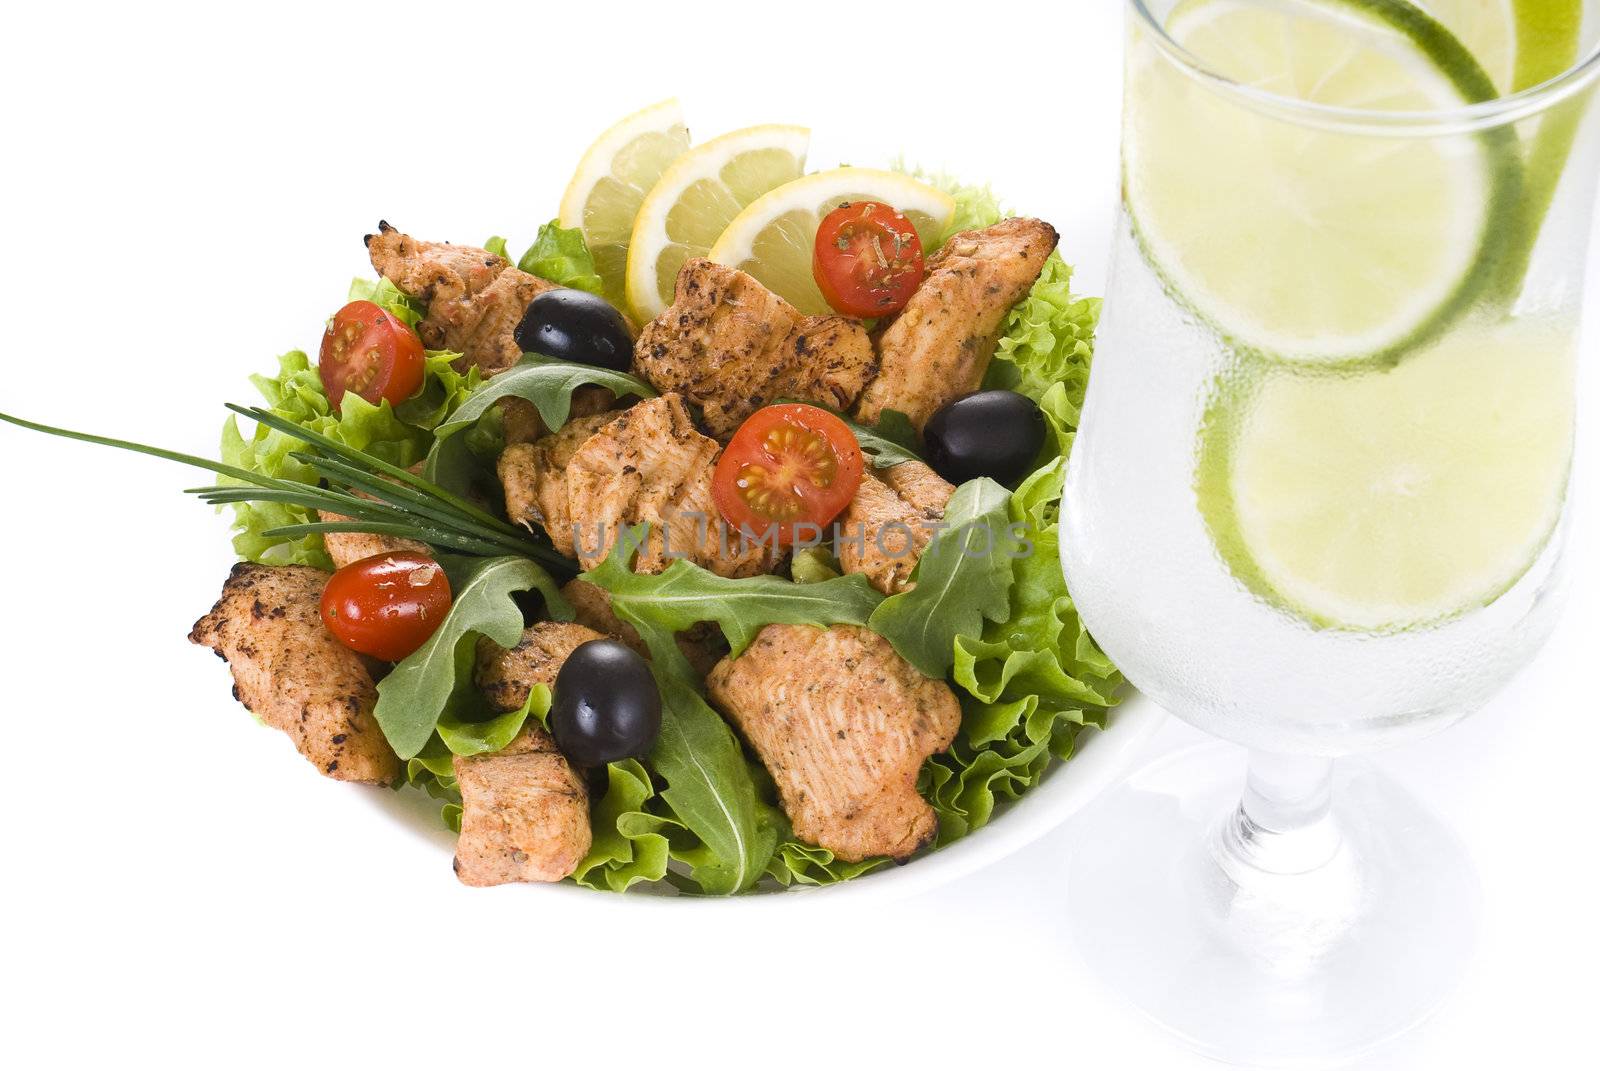 Chicken and vegetable  salad with drink by caldix